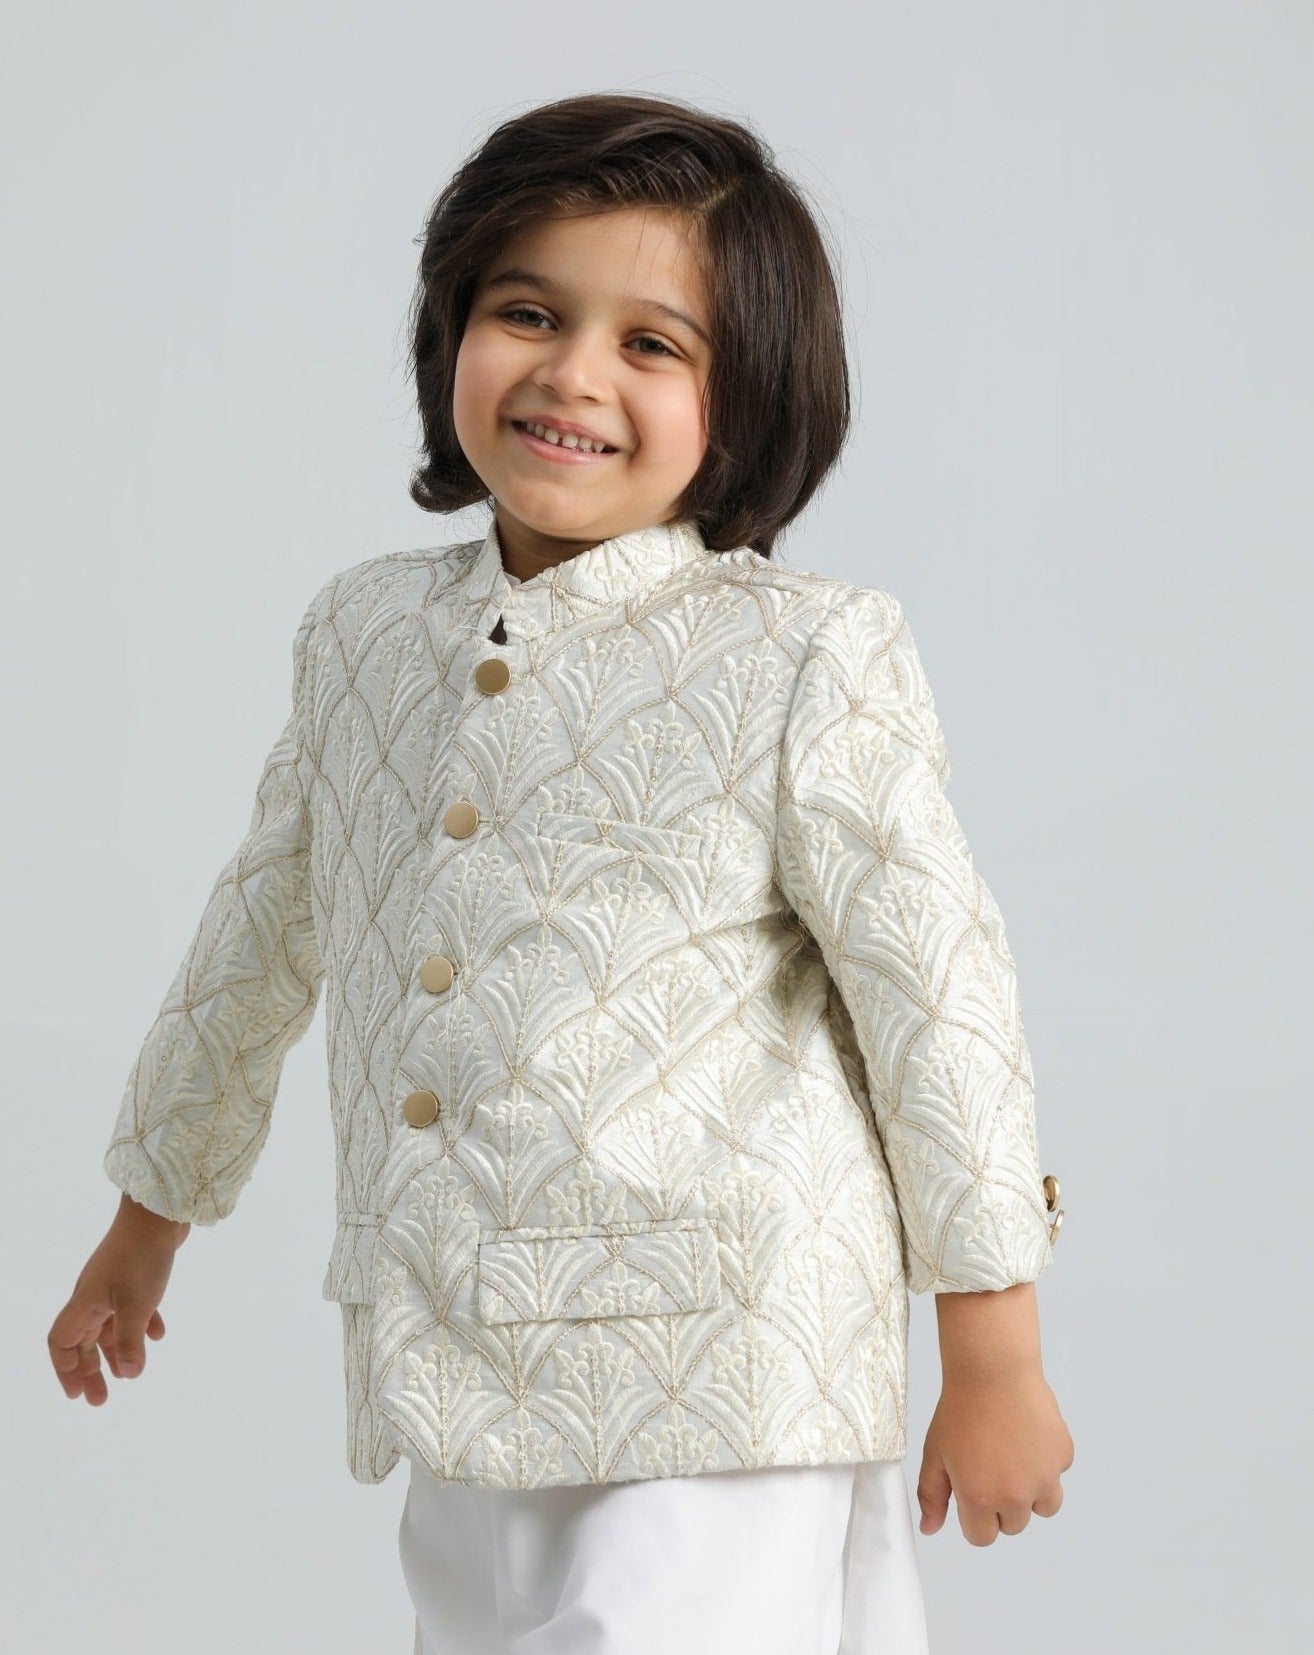 All Off White Sequin Embroided - Festive 3PC Set